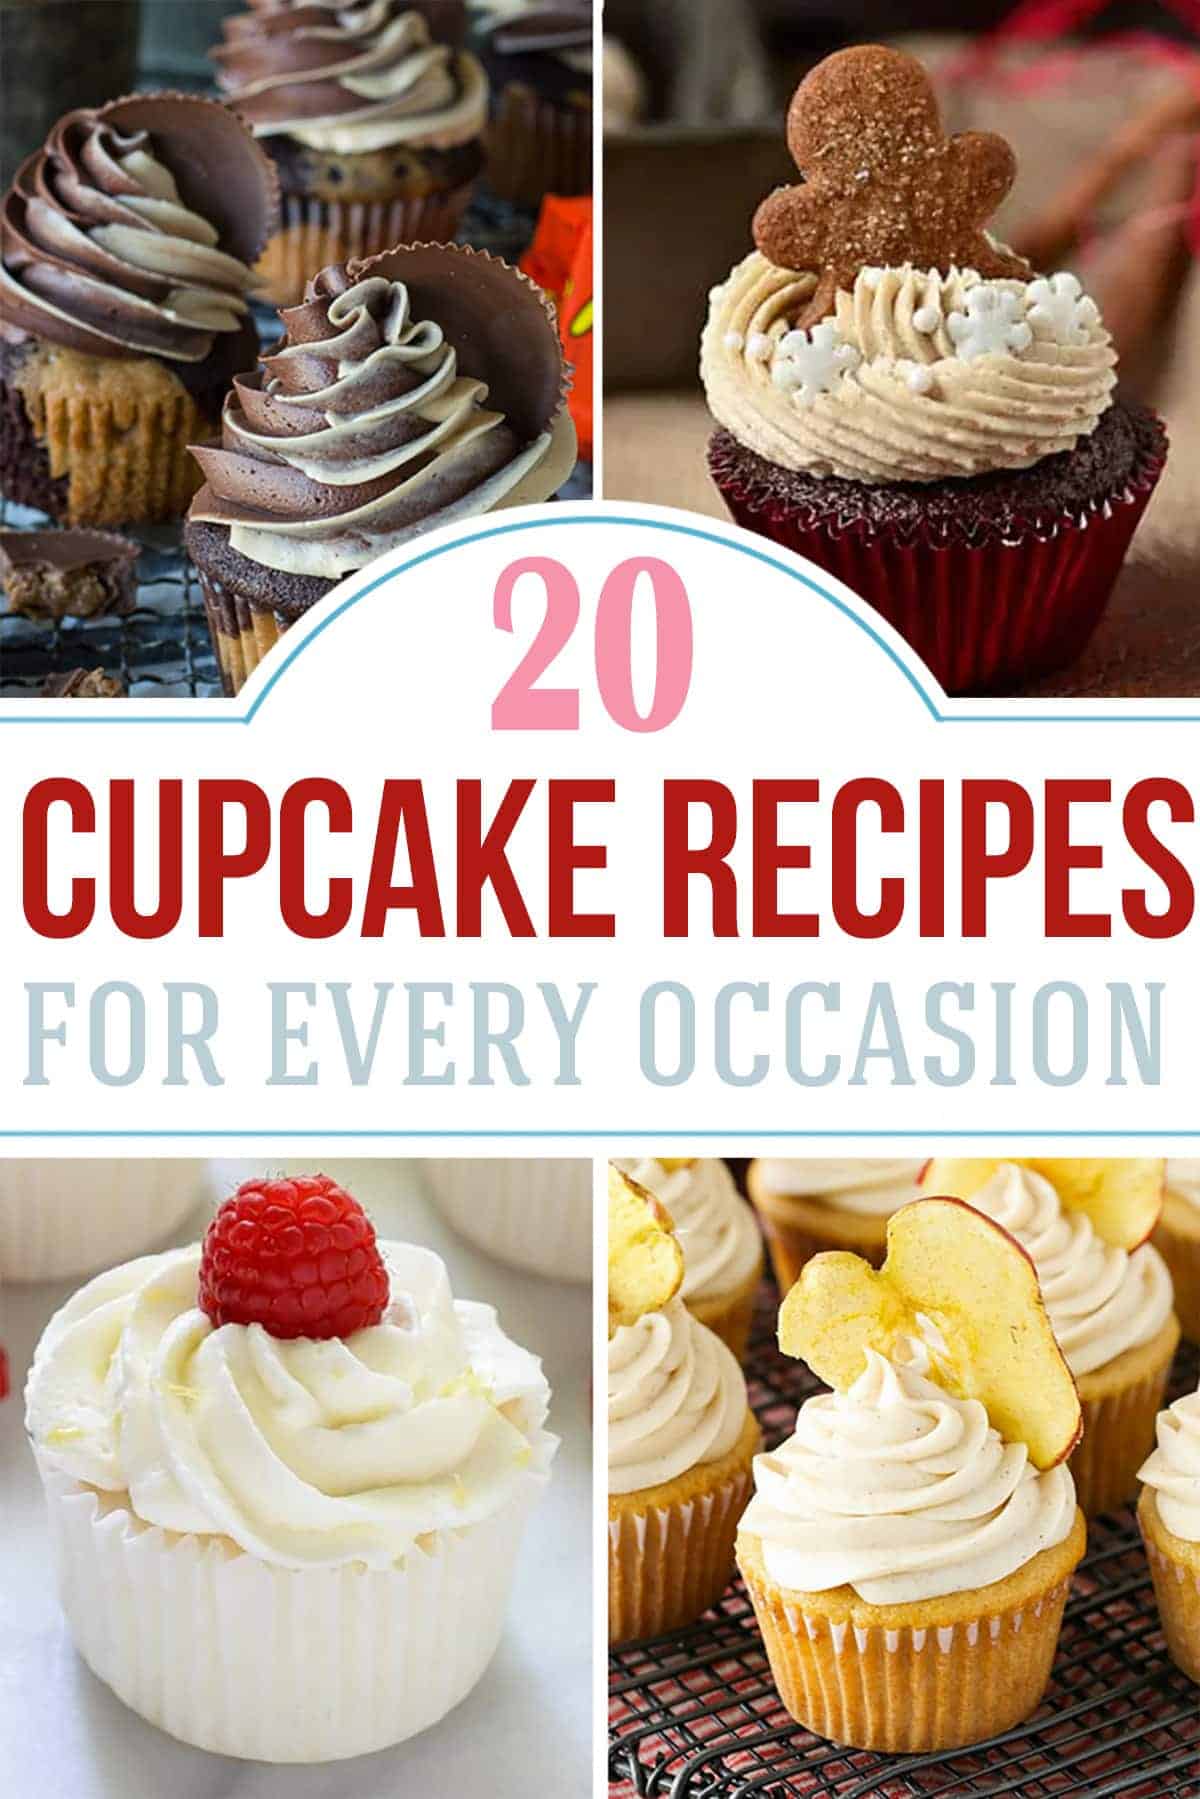 Multiple delicious and adorable cupcake recipe batches with post title